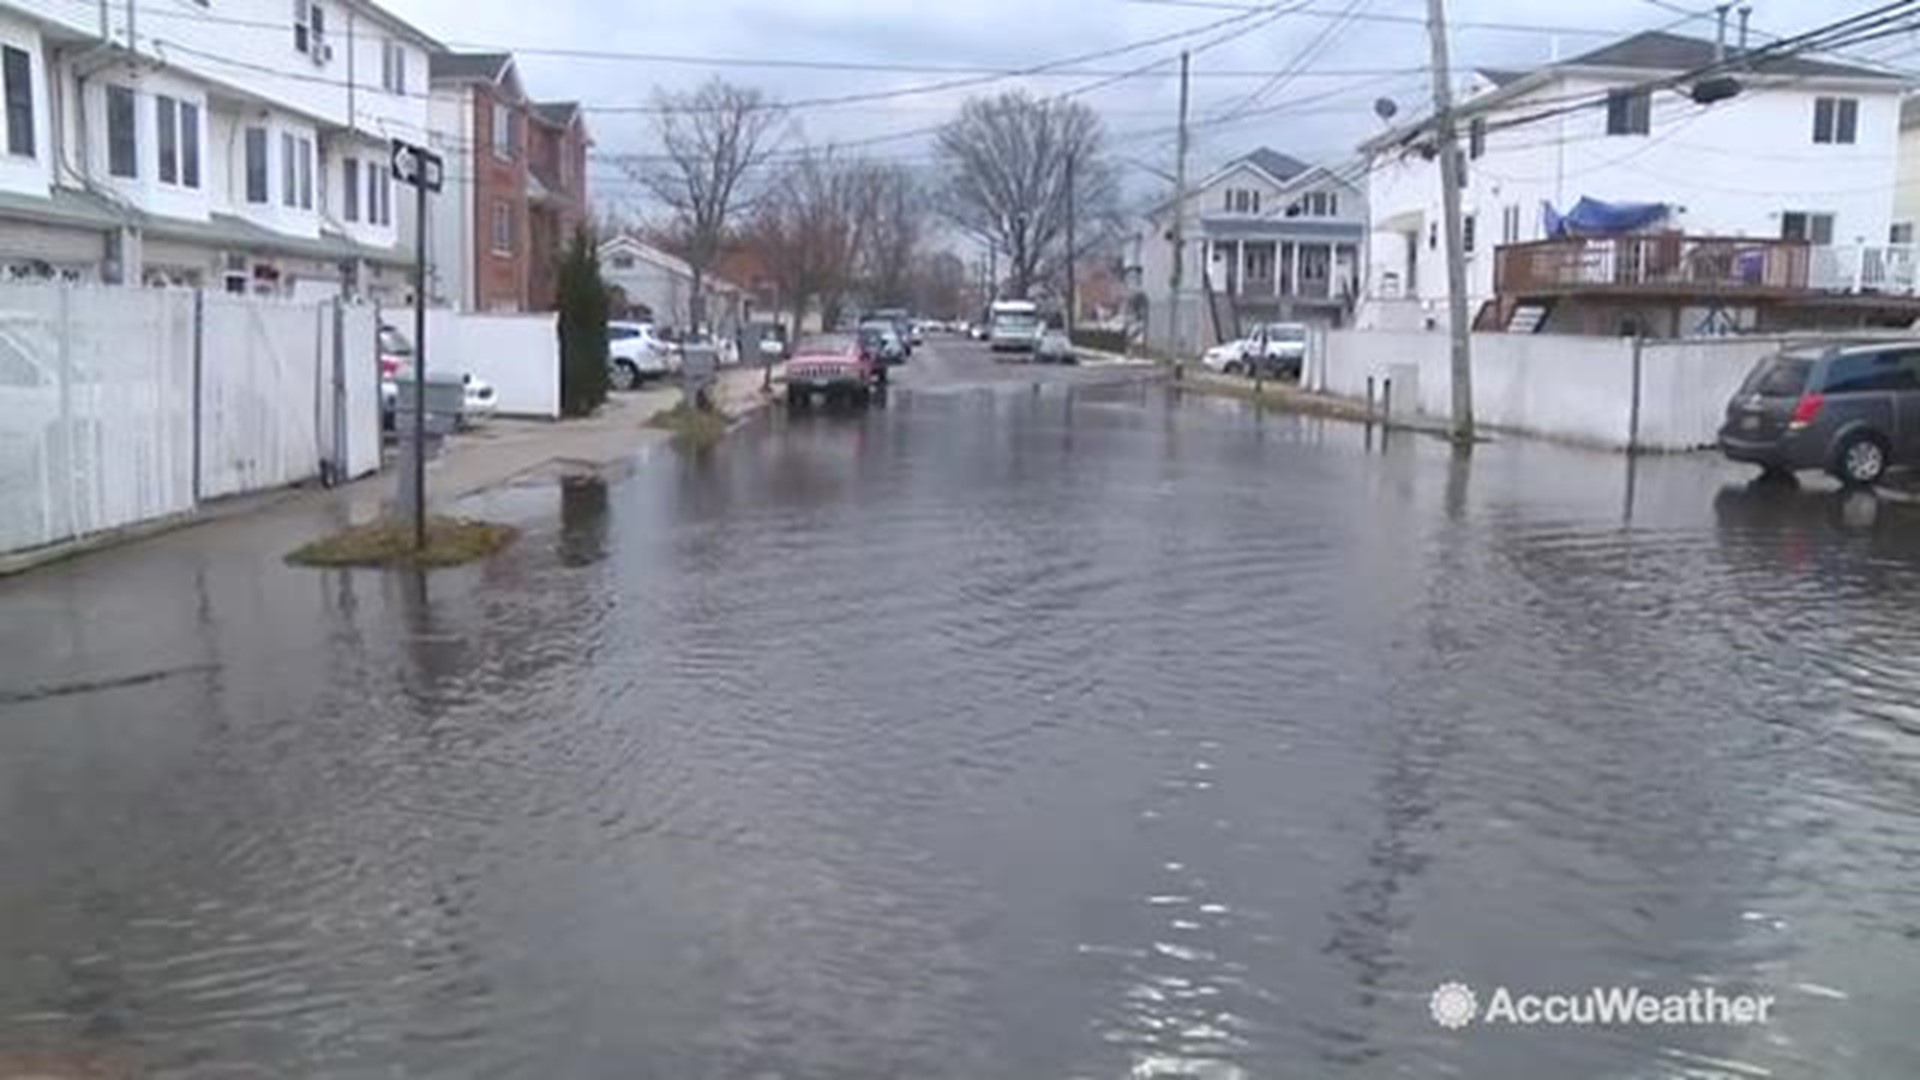 AccuWeather Reporter Dexter Henry visits Midland Beach, New York after heavy weekend rainfall created major street flooding in an area where residents are looking for some relief.